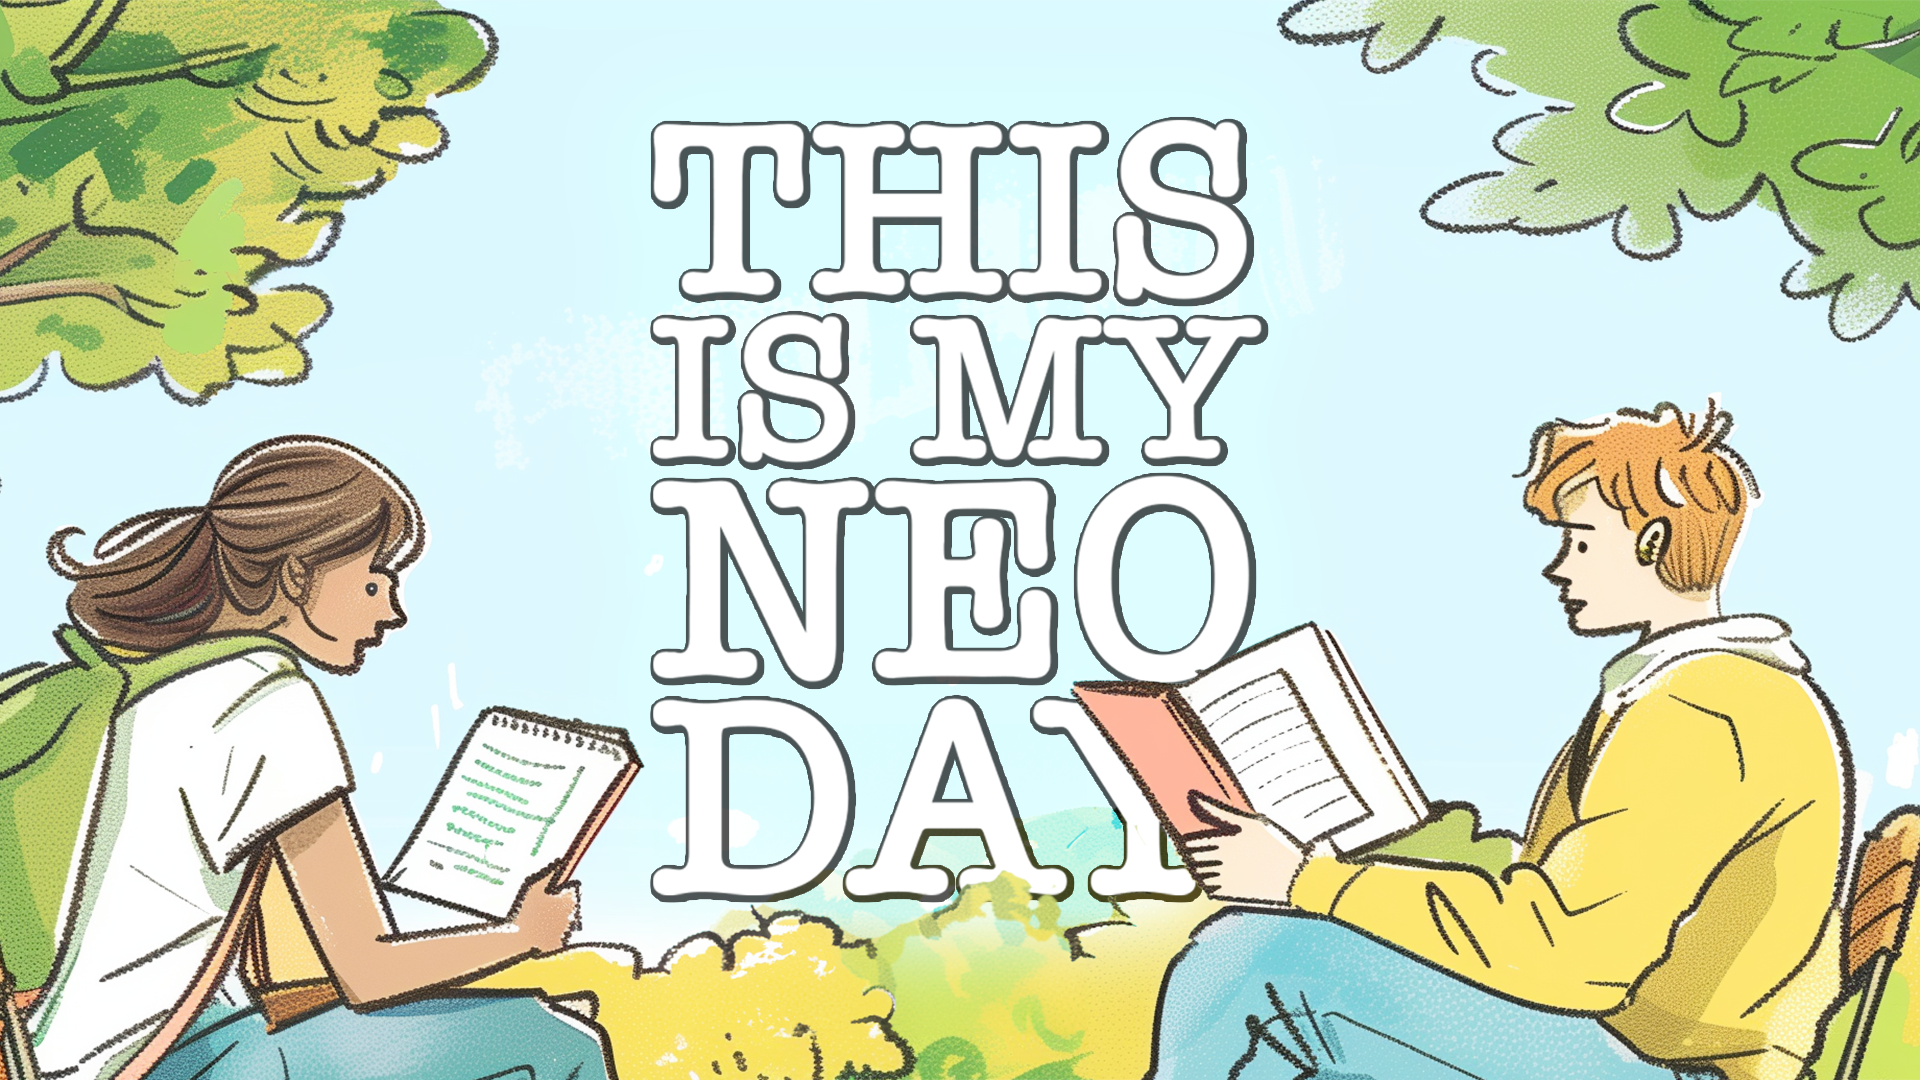 This is my NEO day